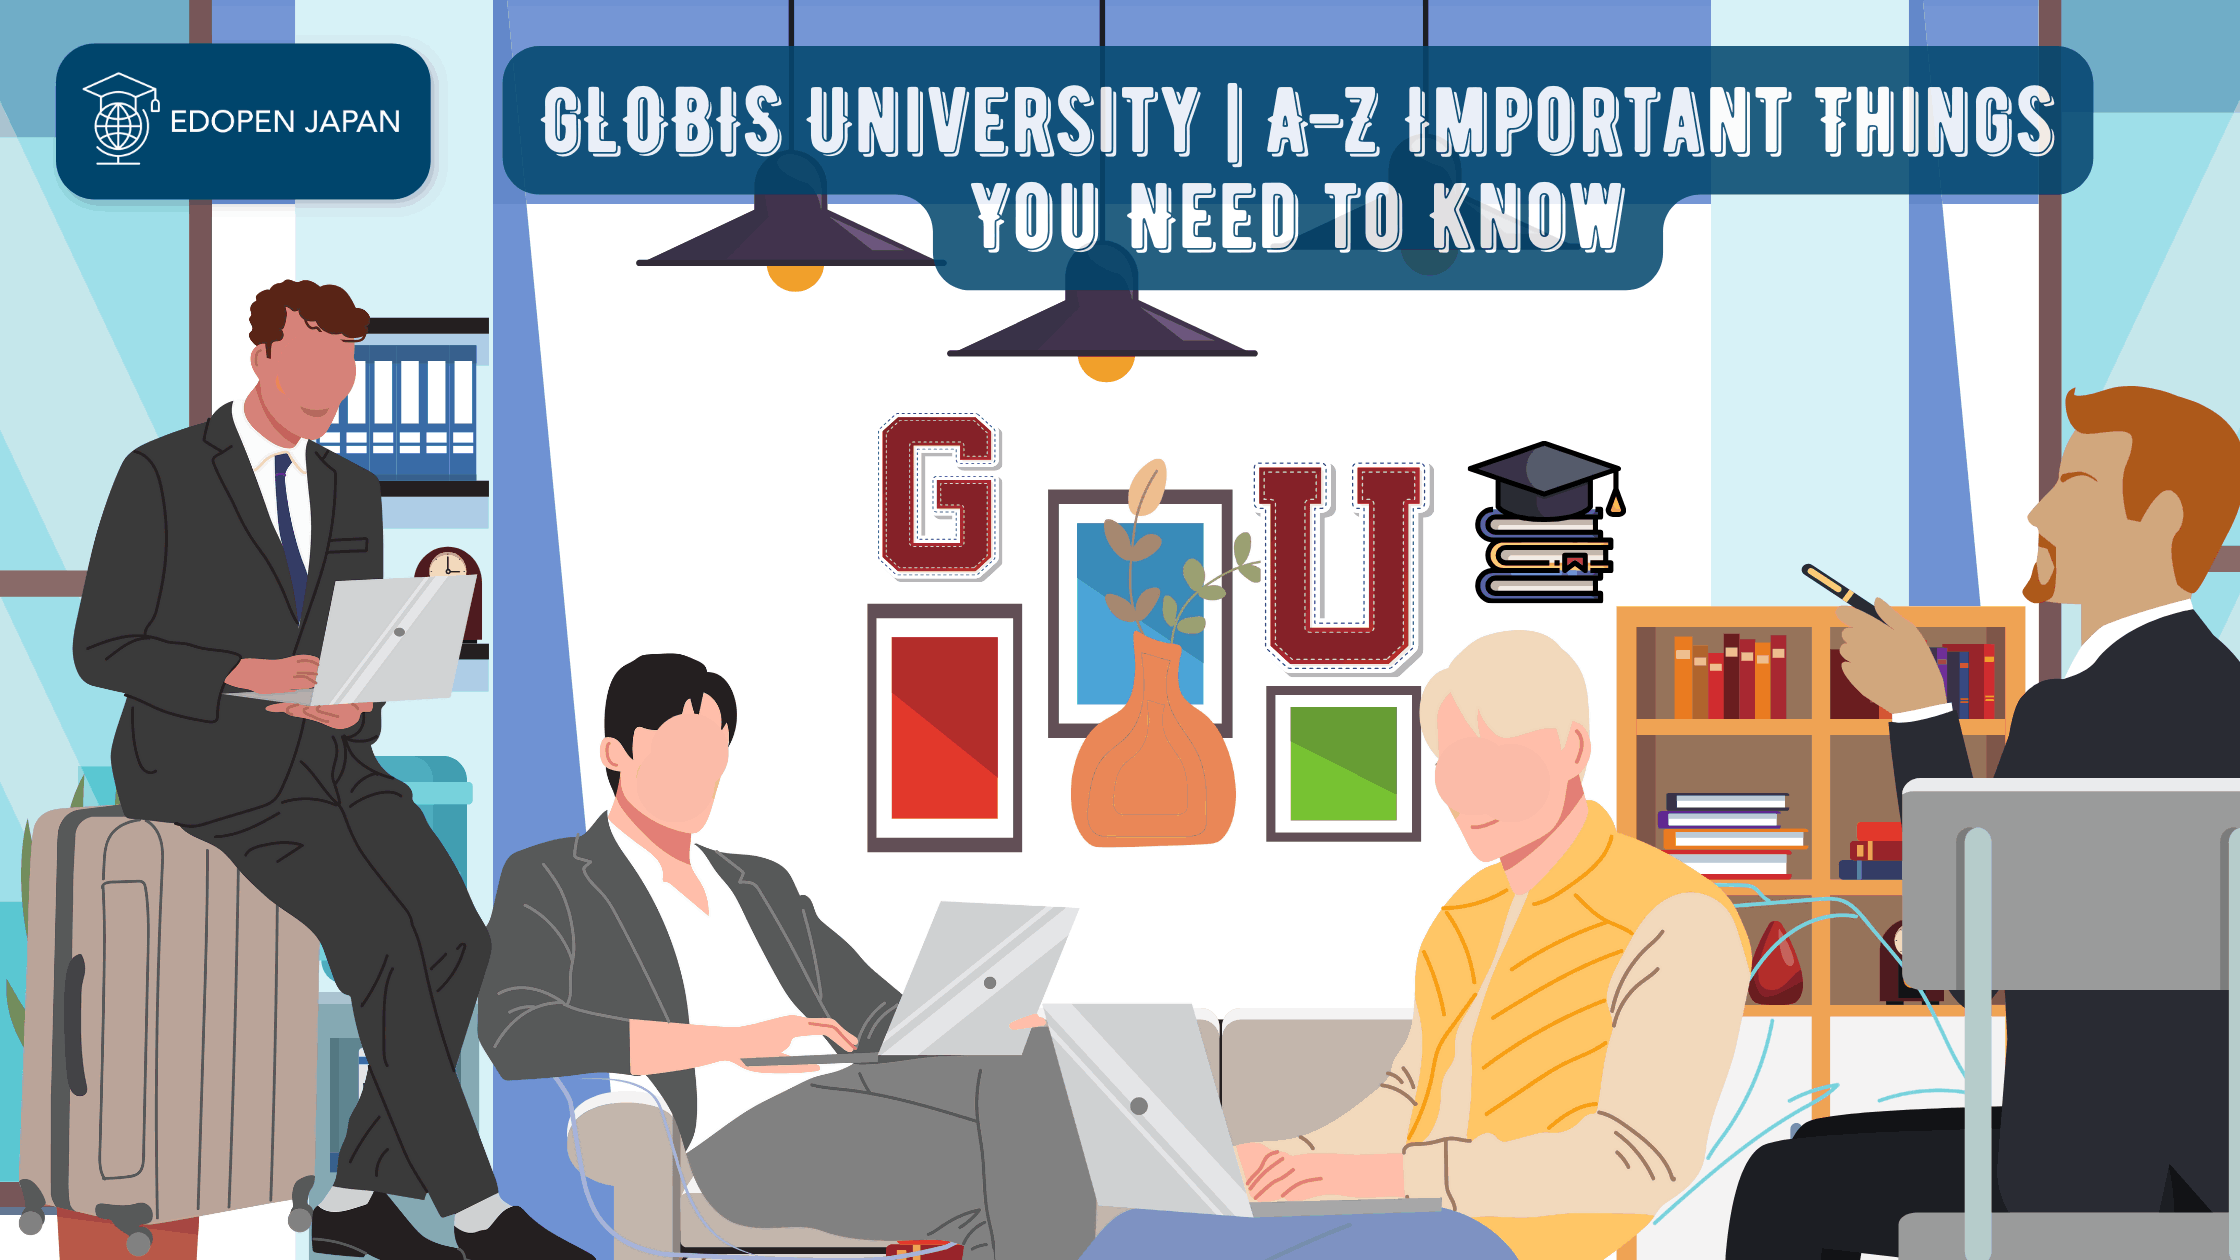 GLOBIS University | A-Z Important Things You Need to Know - EDOPEN Japan